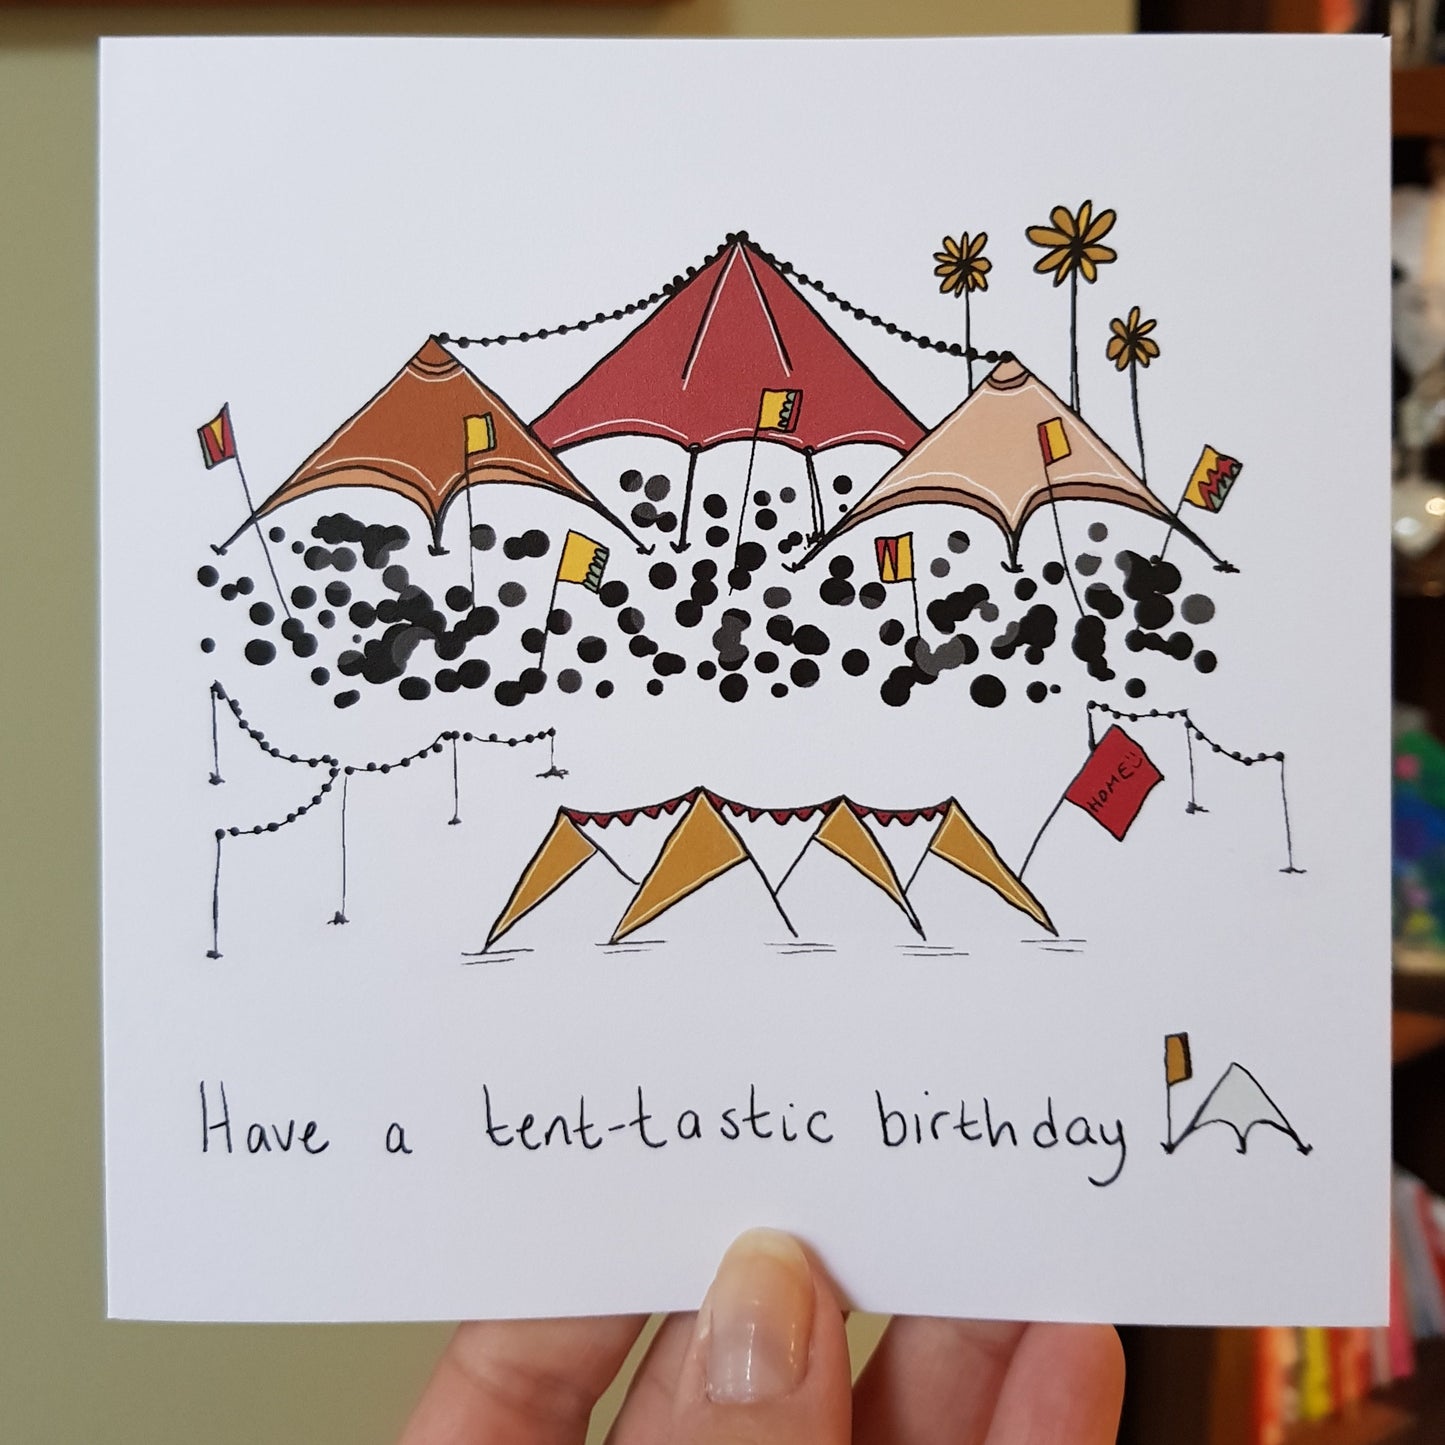 Have a tent-tastic birthday - festival inspired greeting card 